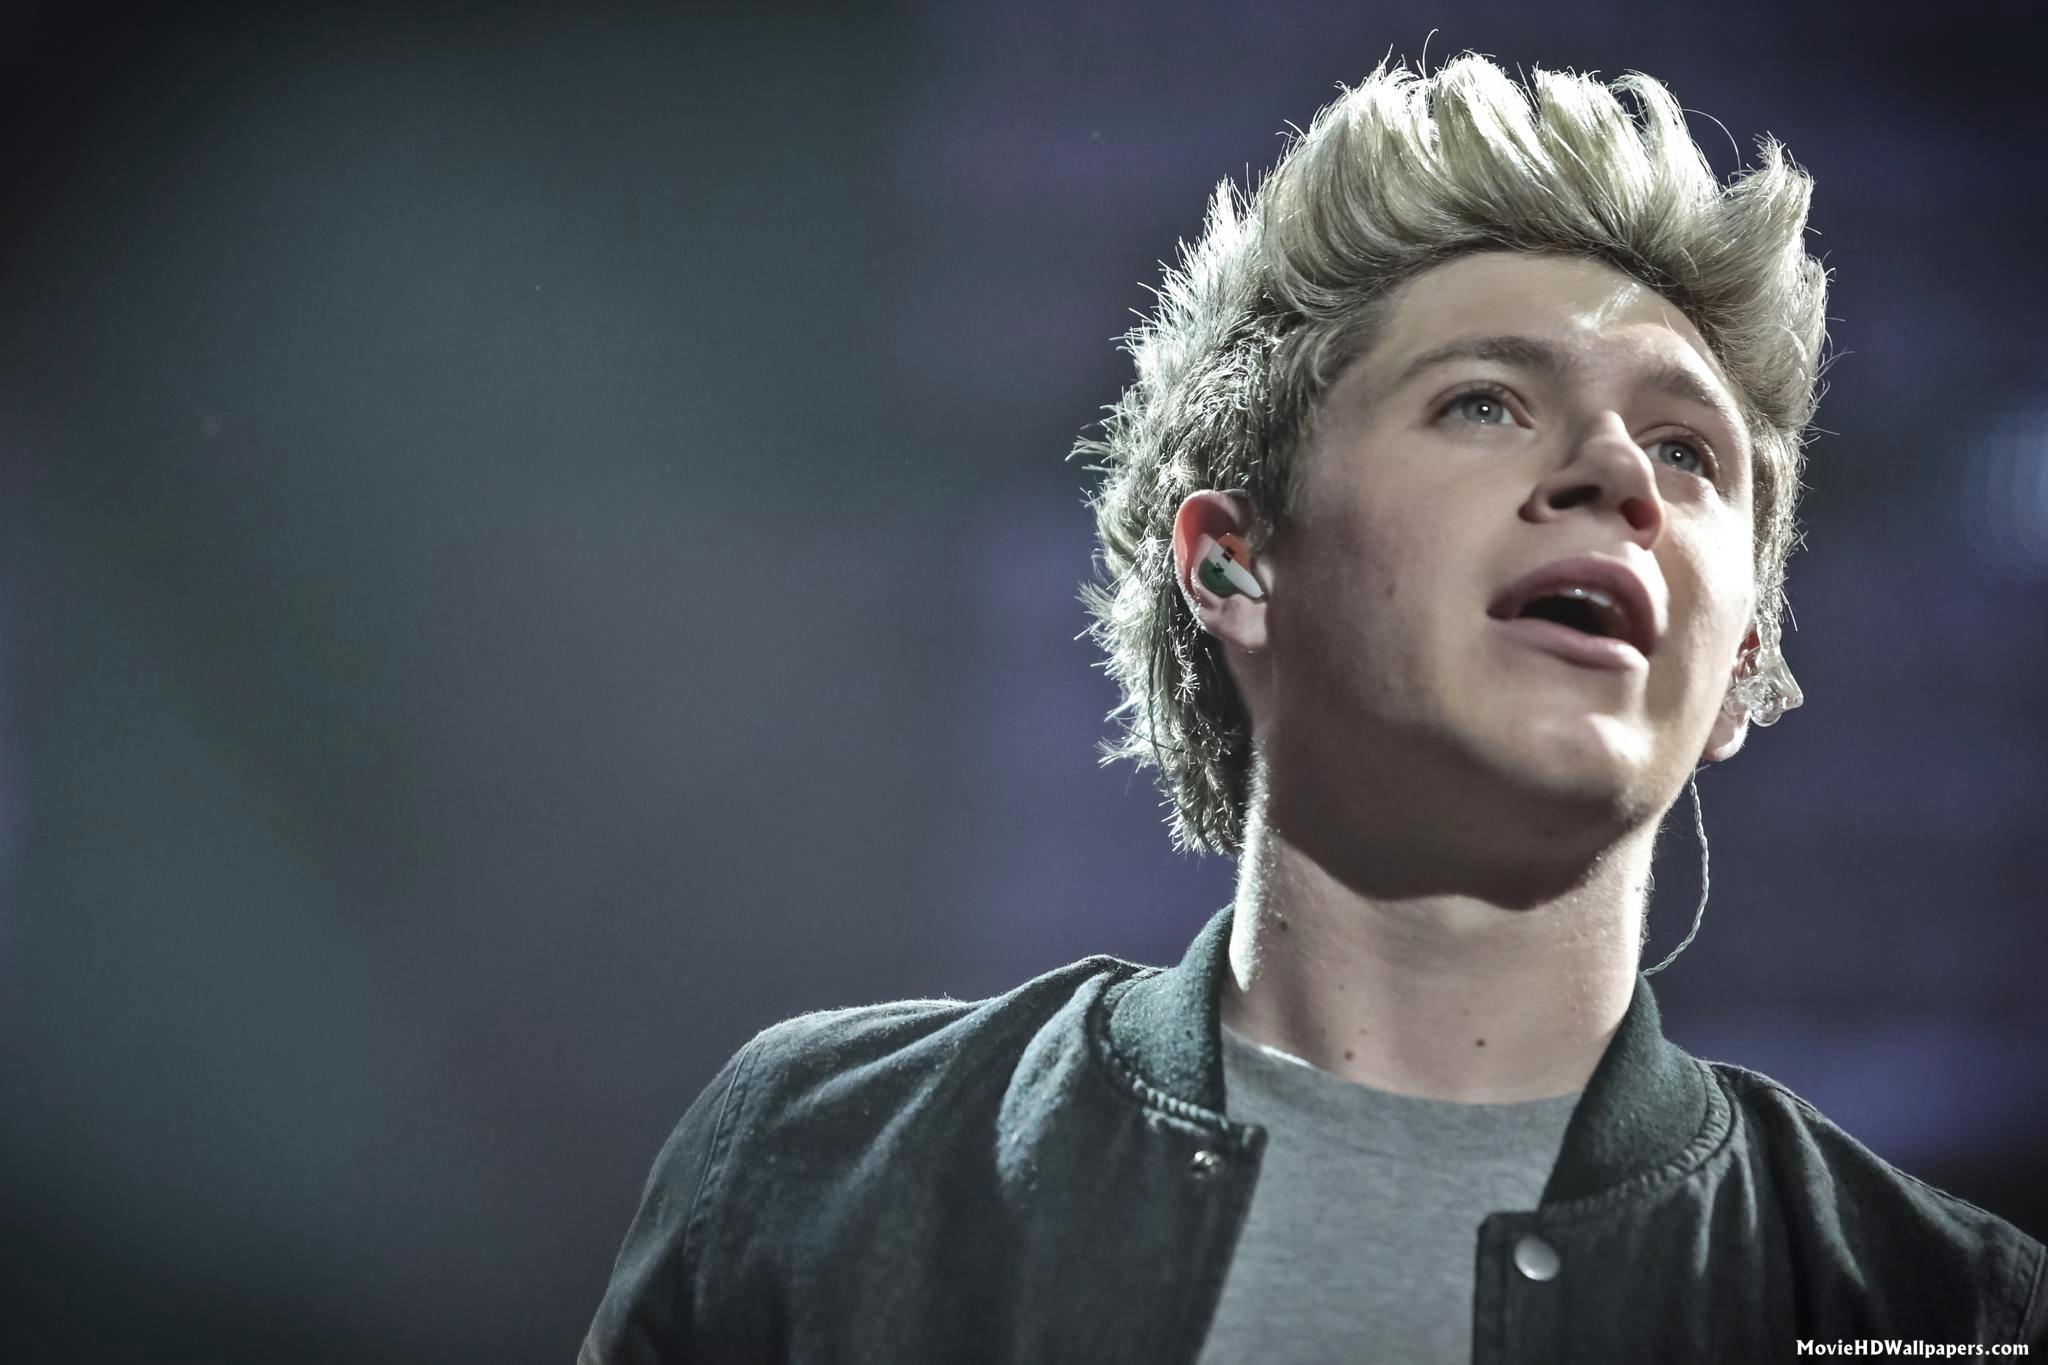 Niall Horan In One Direction This Is Us. Movie HD Wallpaper